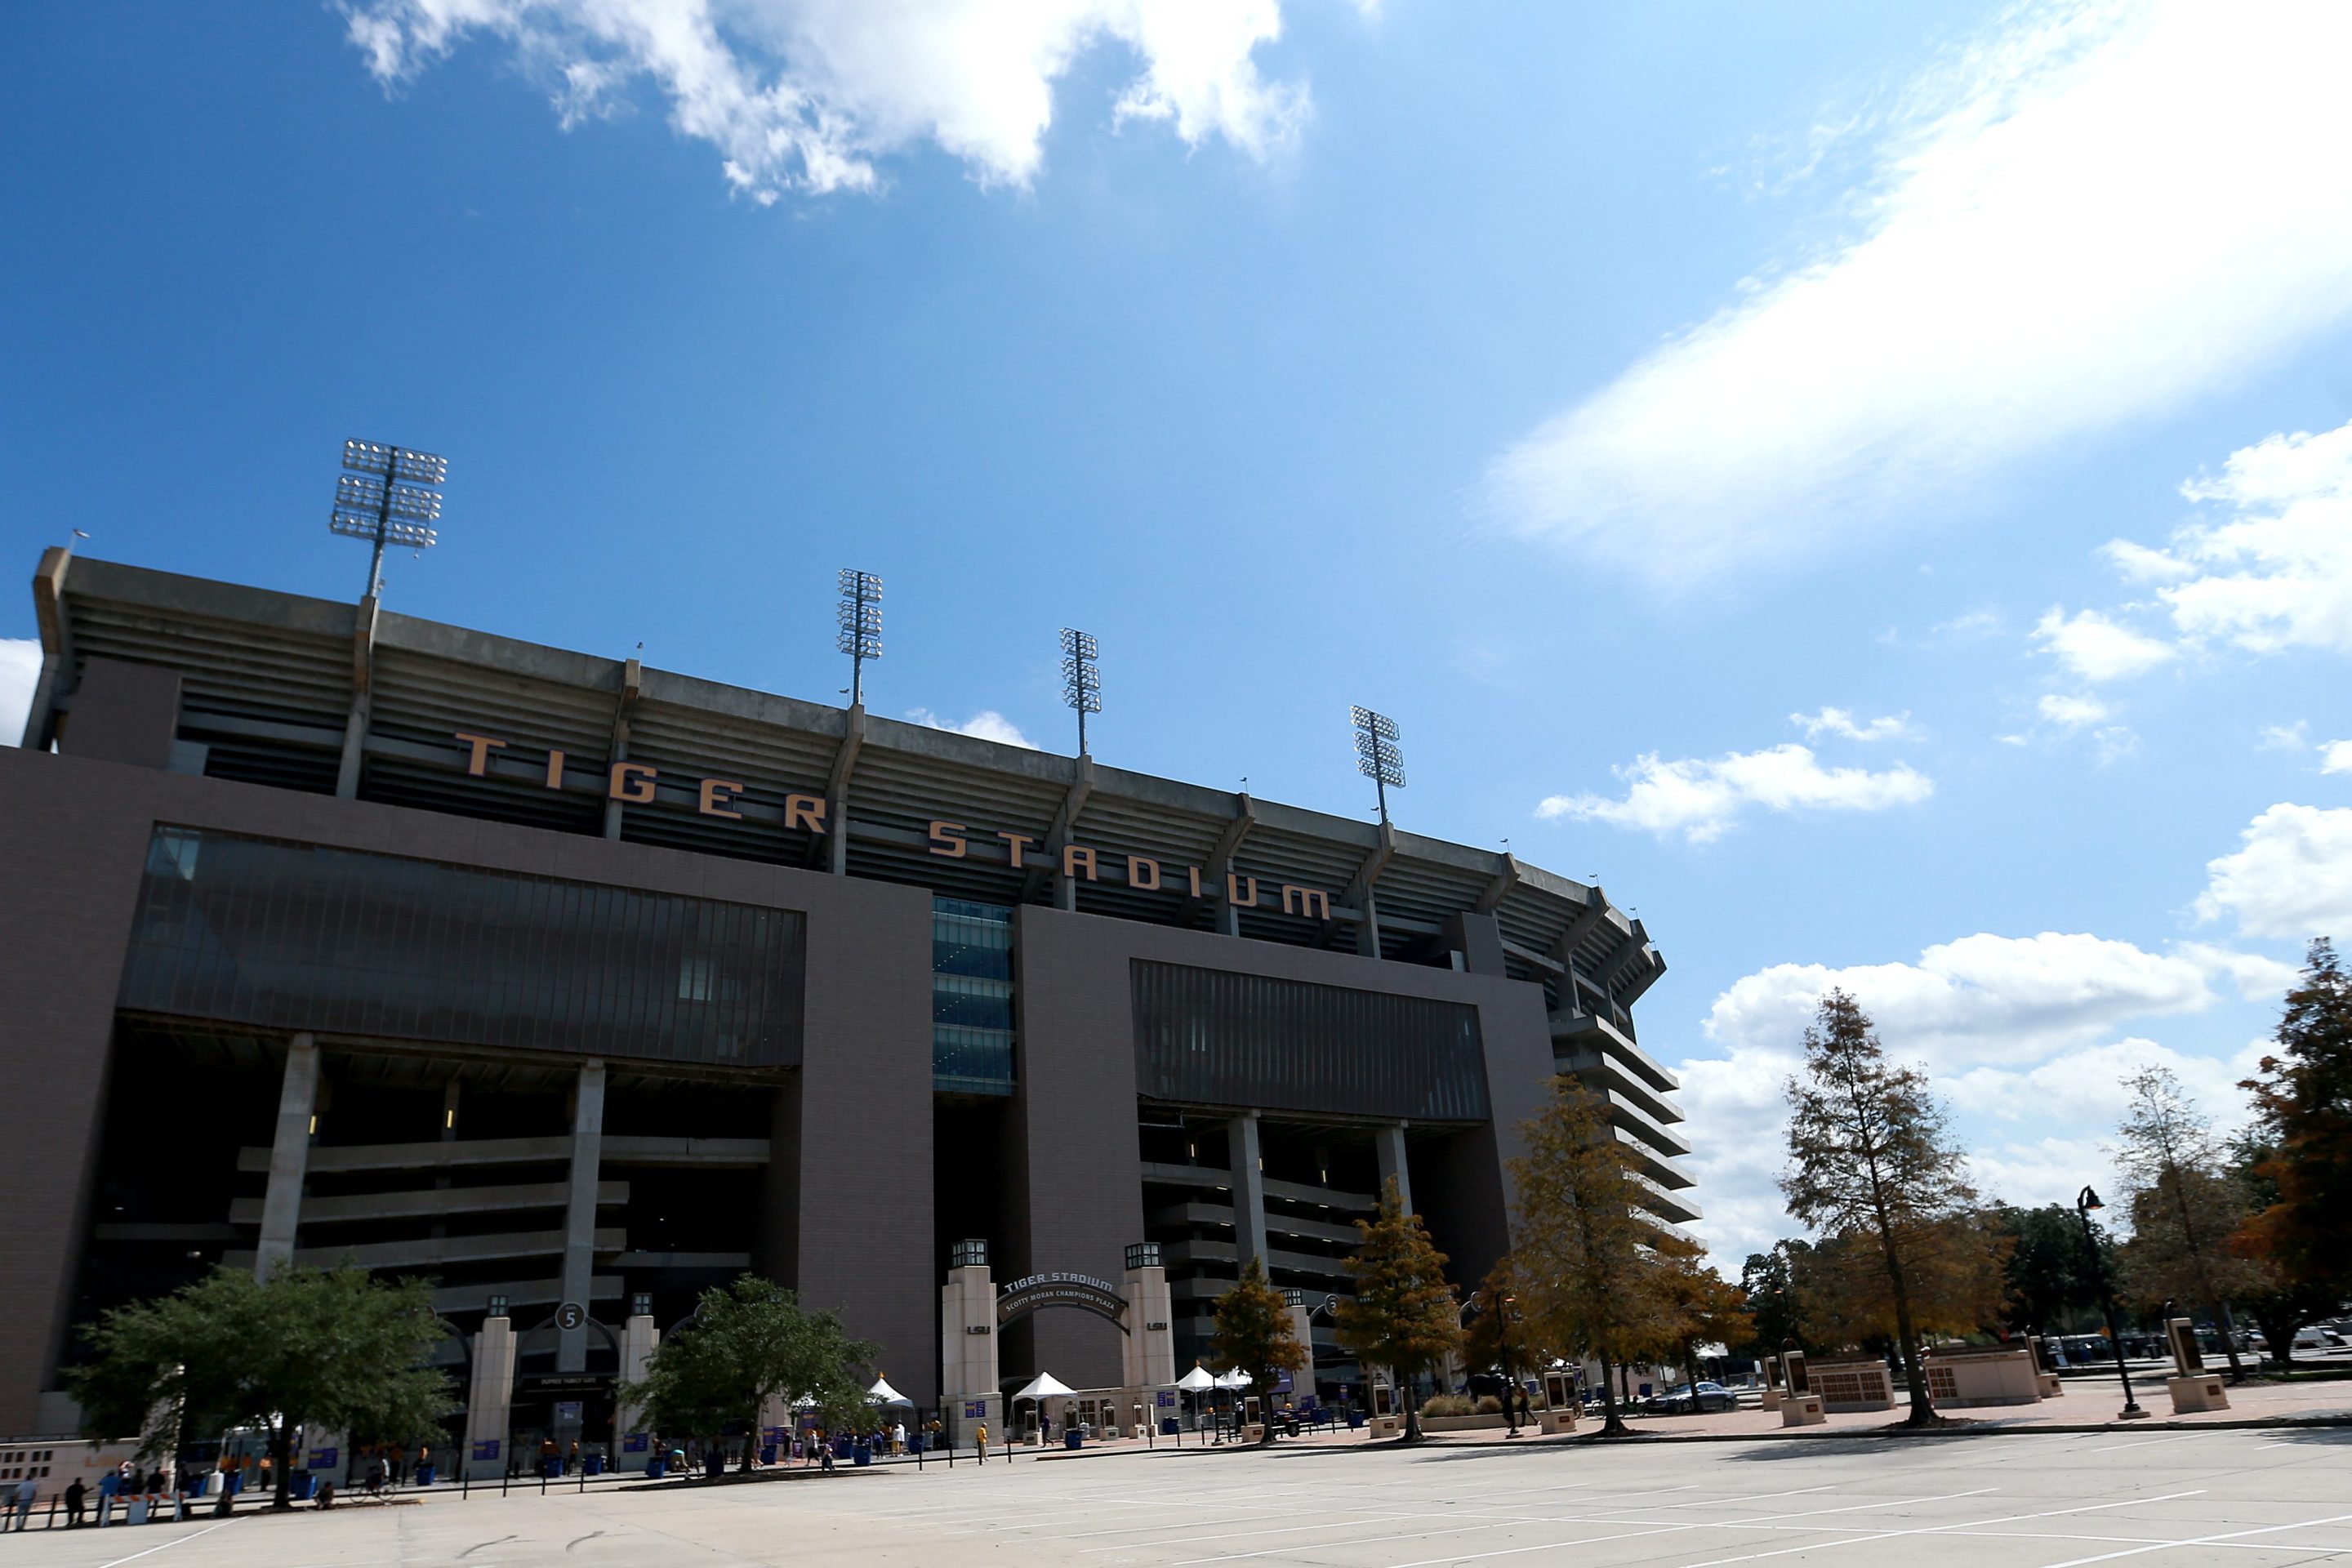 A general view of the exterior of Tiger Stadium.